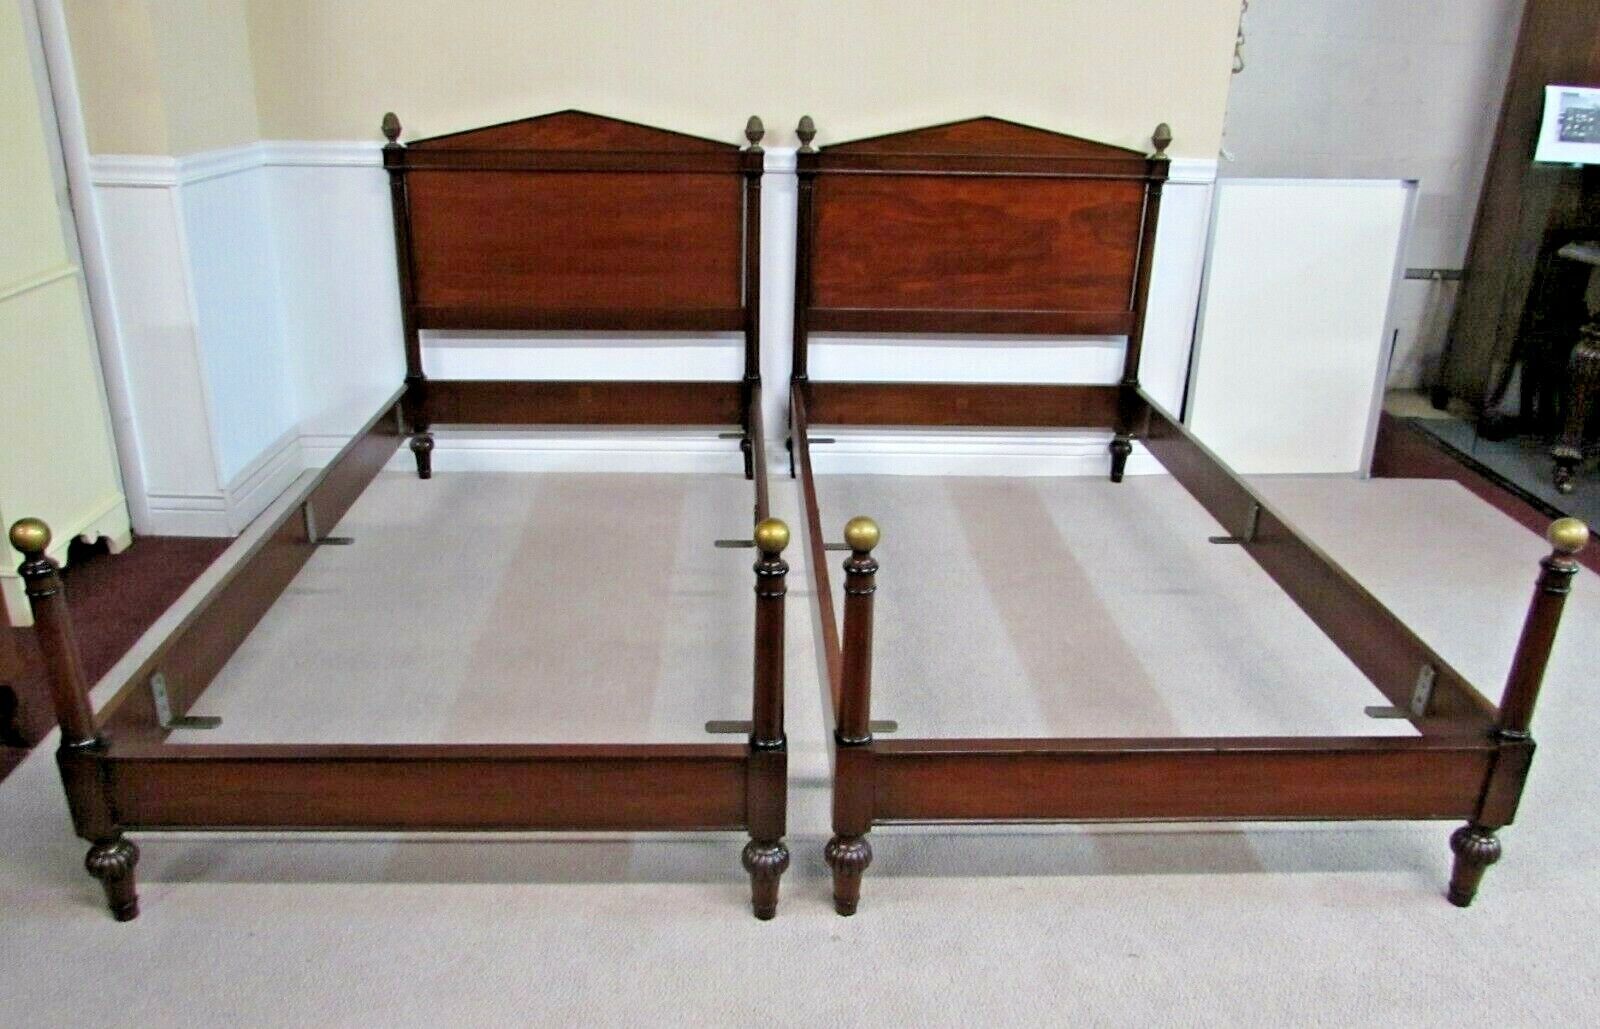 PAIR KITTINGER NEOCLASSICAL STYLE TWIN POSTER BEDS METAL ACORN PINEAPPLE FINIALS Unbranded 115